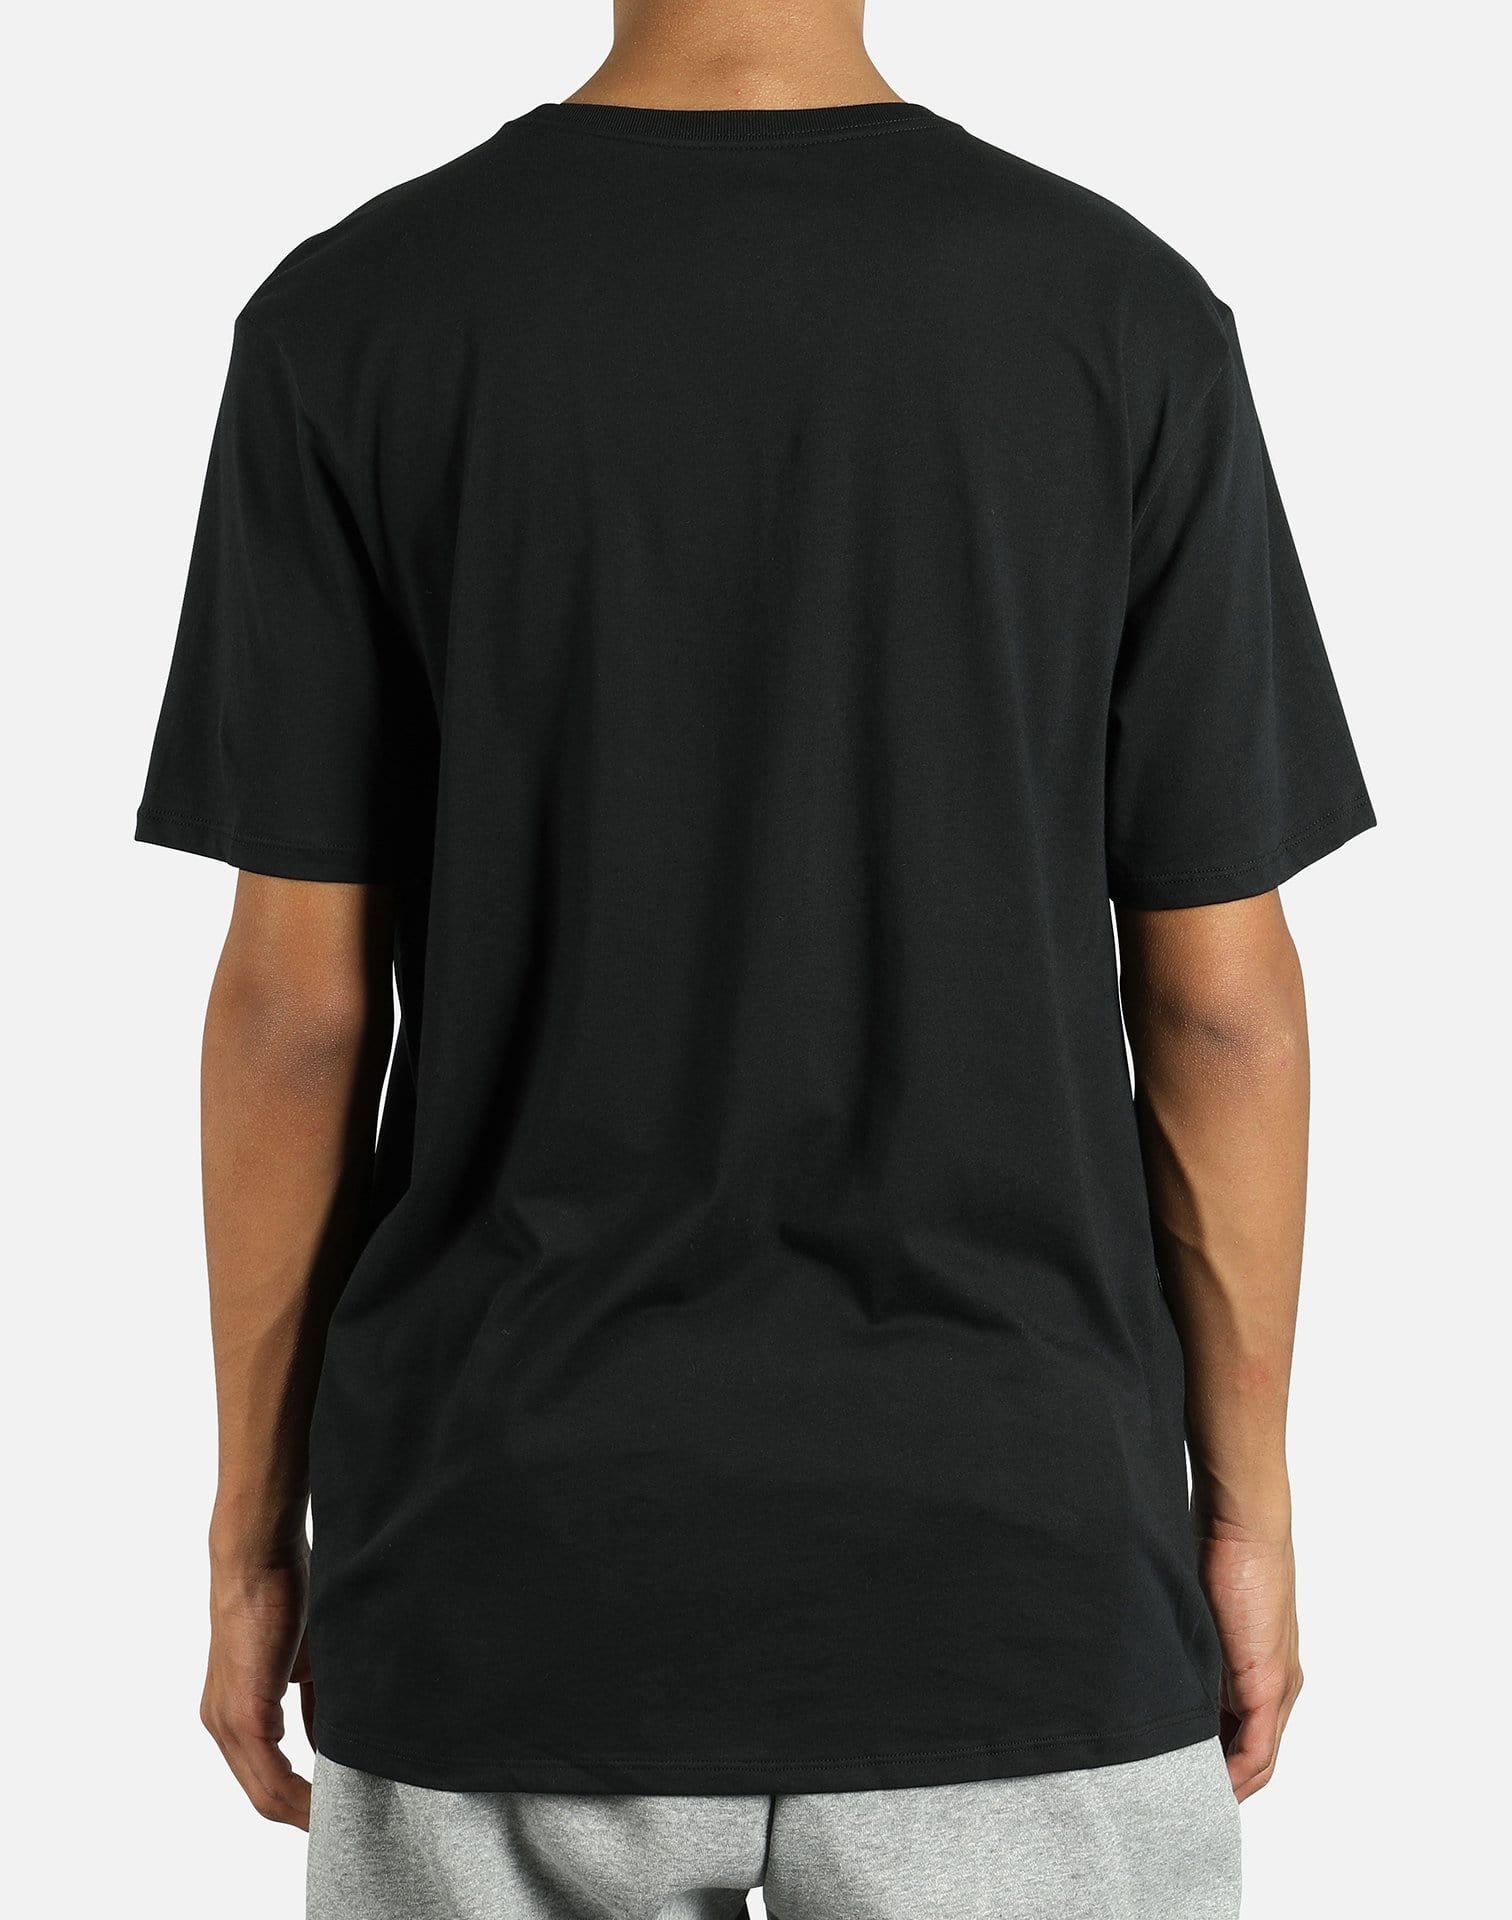 Nike HYBRID 'JUST DO IT' GRAPHIC TEE